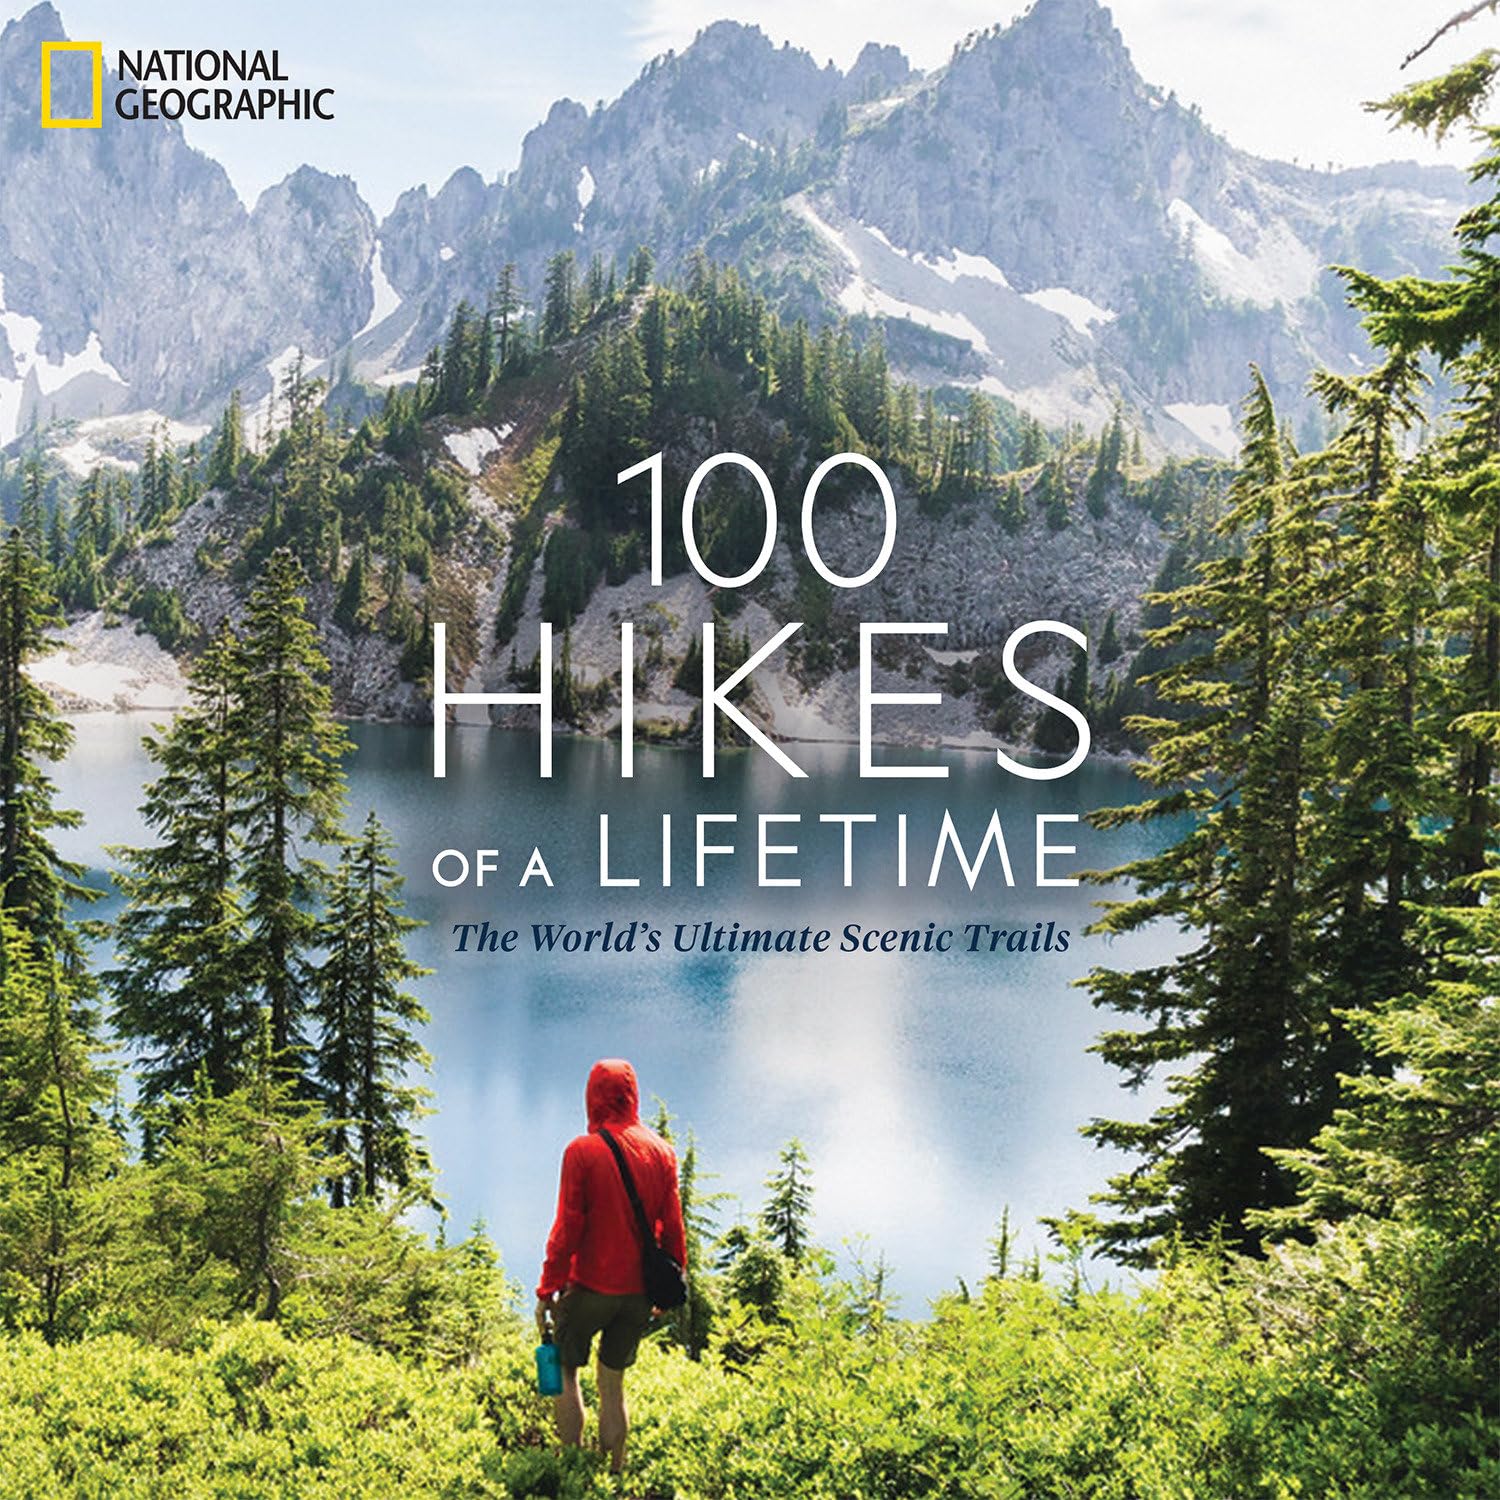 100 Hikes of a Lifetime book cover